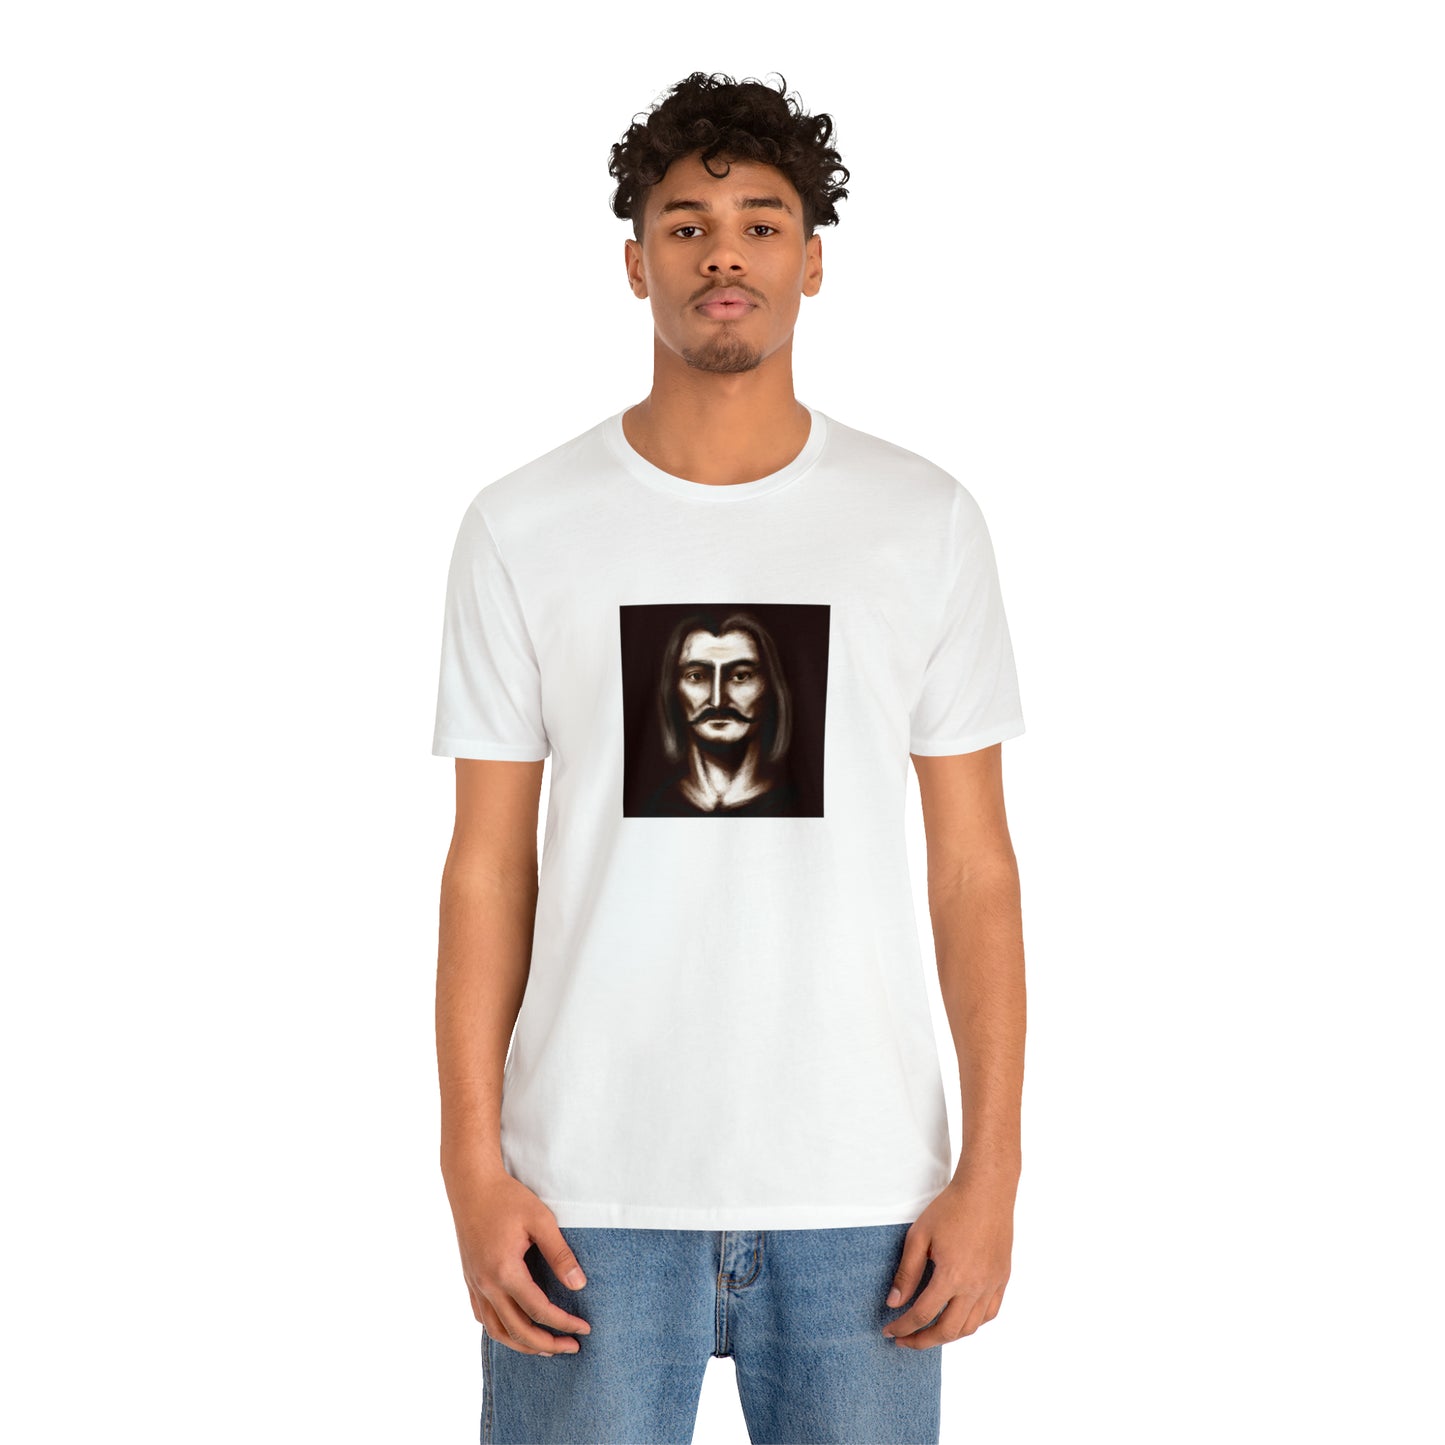 Cesare Columbo is an iconic Italian streetwear designer who had a major impact on the fashion world in the 1990s. He was known for bringing classic Italian craftsmanship and style to the forefront of streetwear trends with his bold,-Tee